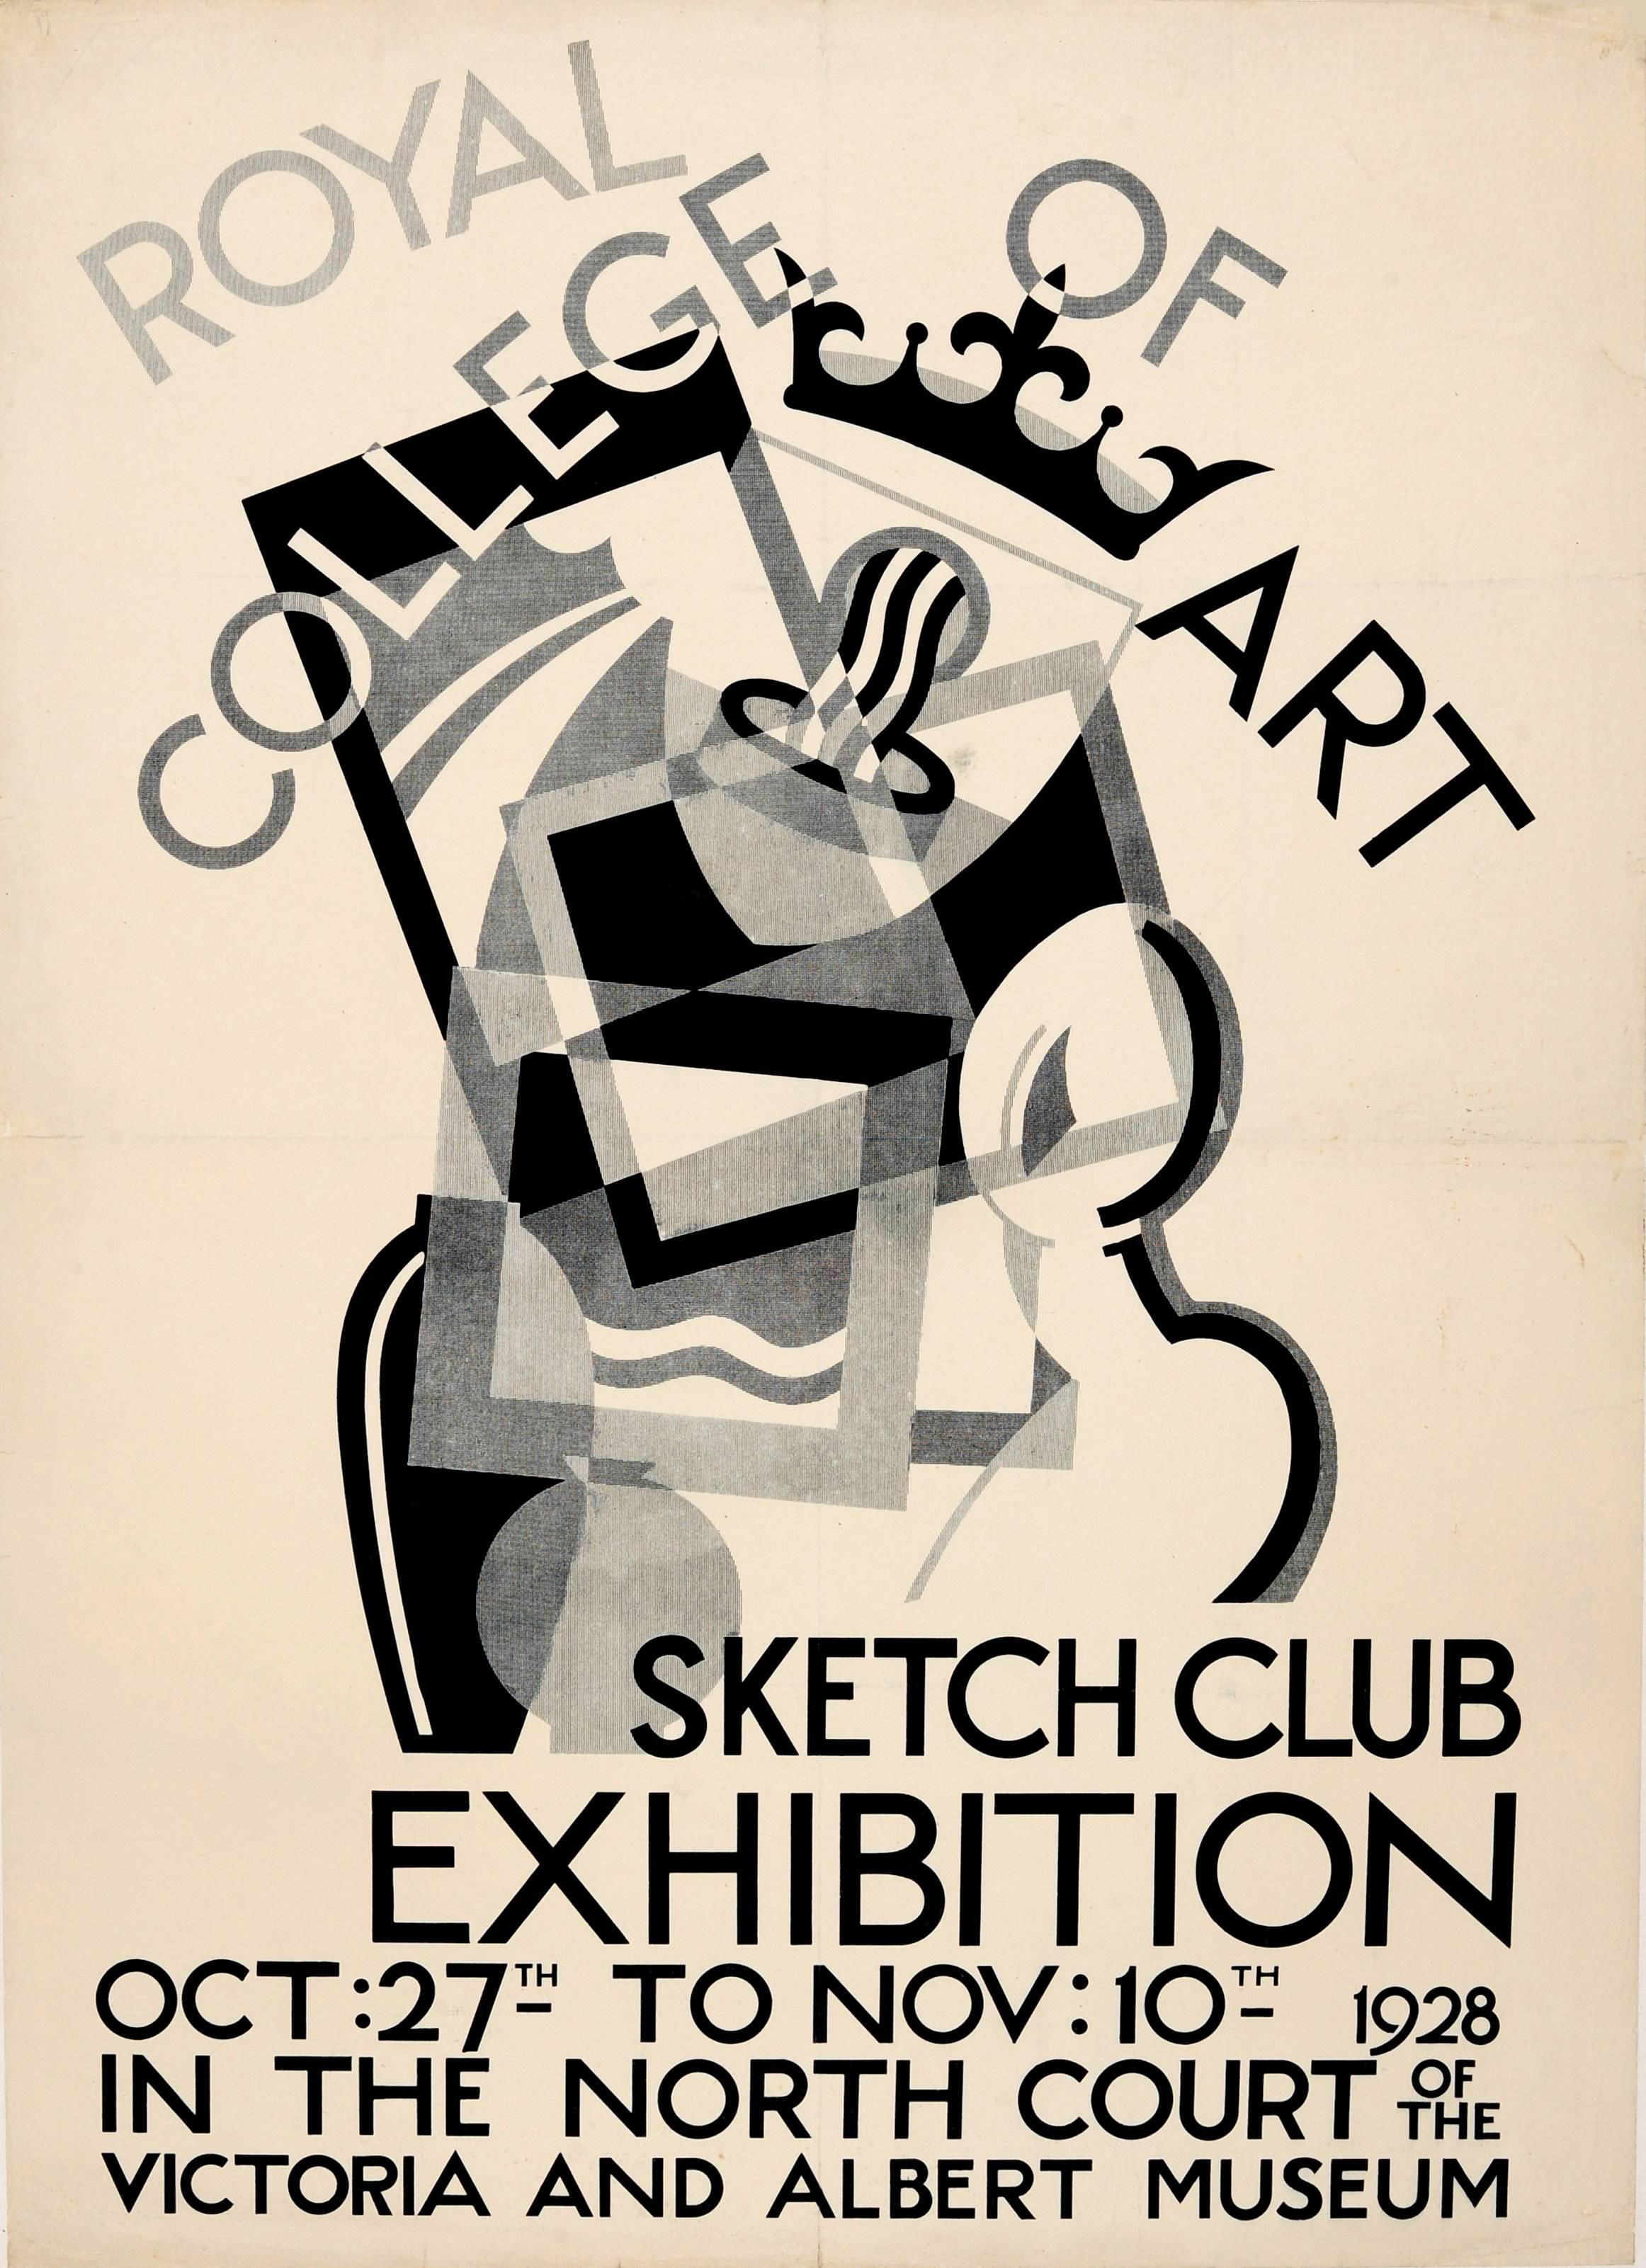 A.E. Halliwell Print - Original Royal College Of Art Sketch Club Poster - 1928 Exhibition At V&A Museum